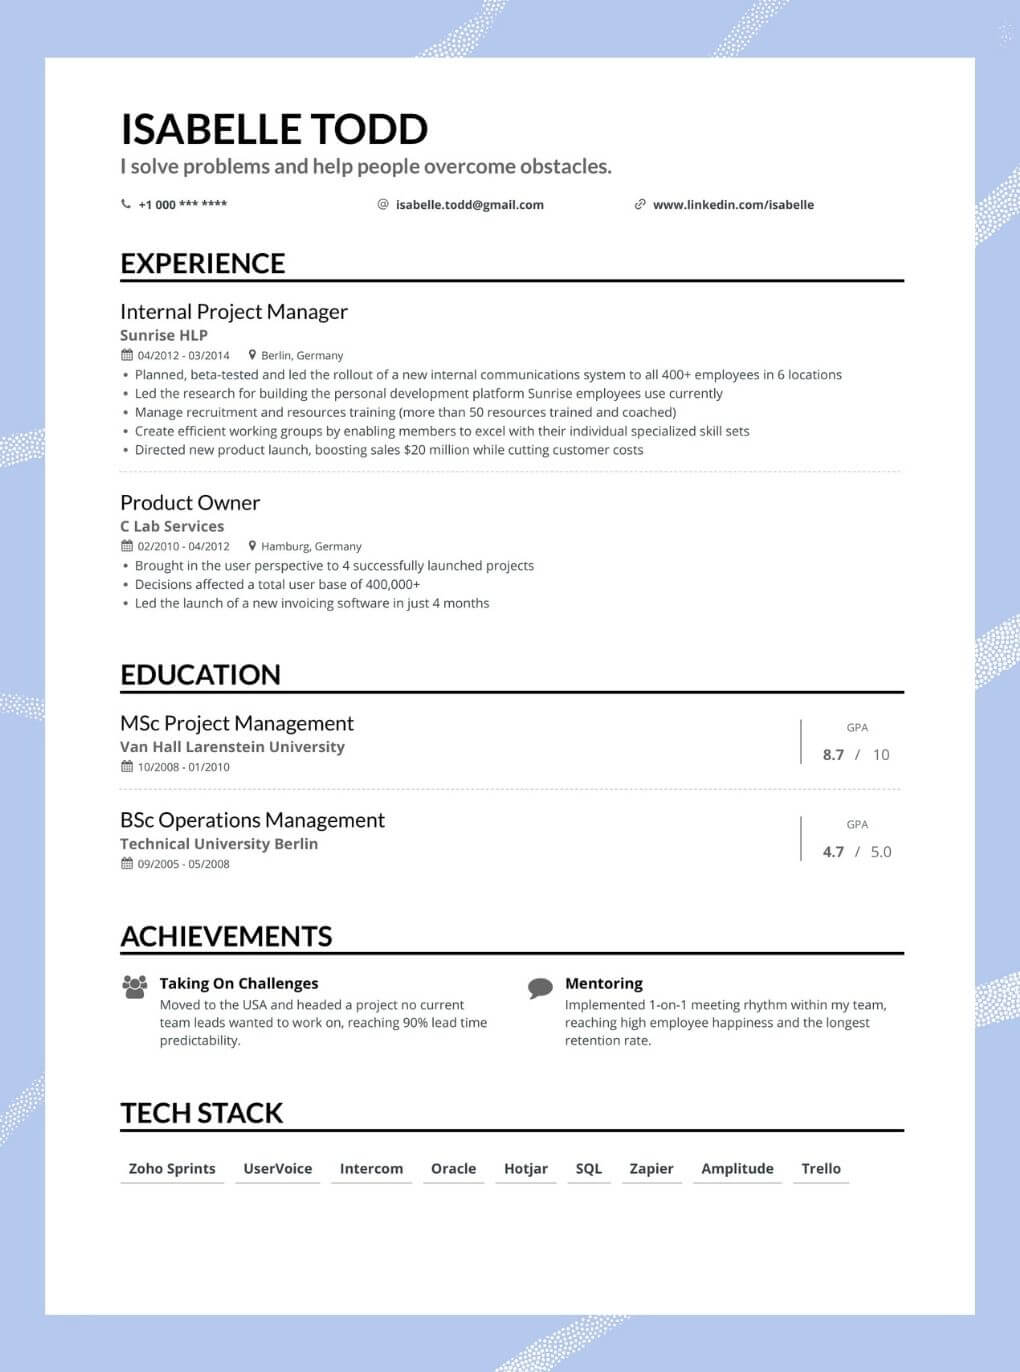 How to Decide On Using A Reverse Chronological Resume